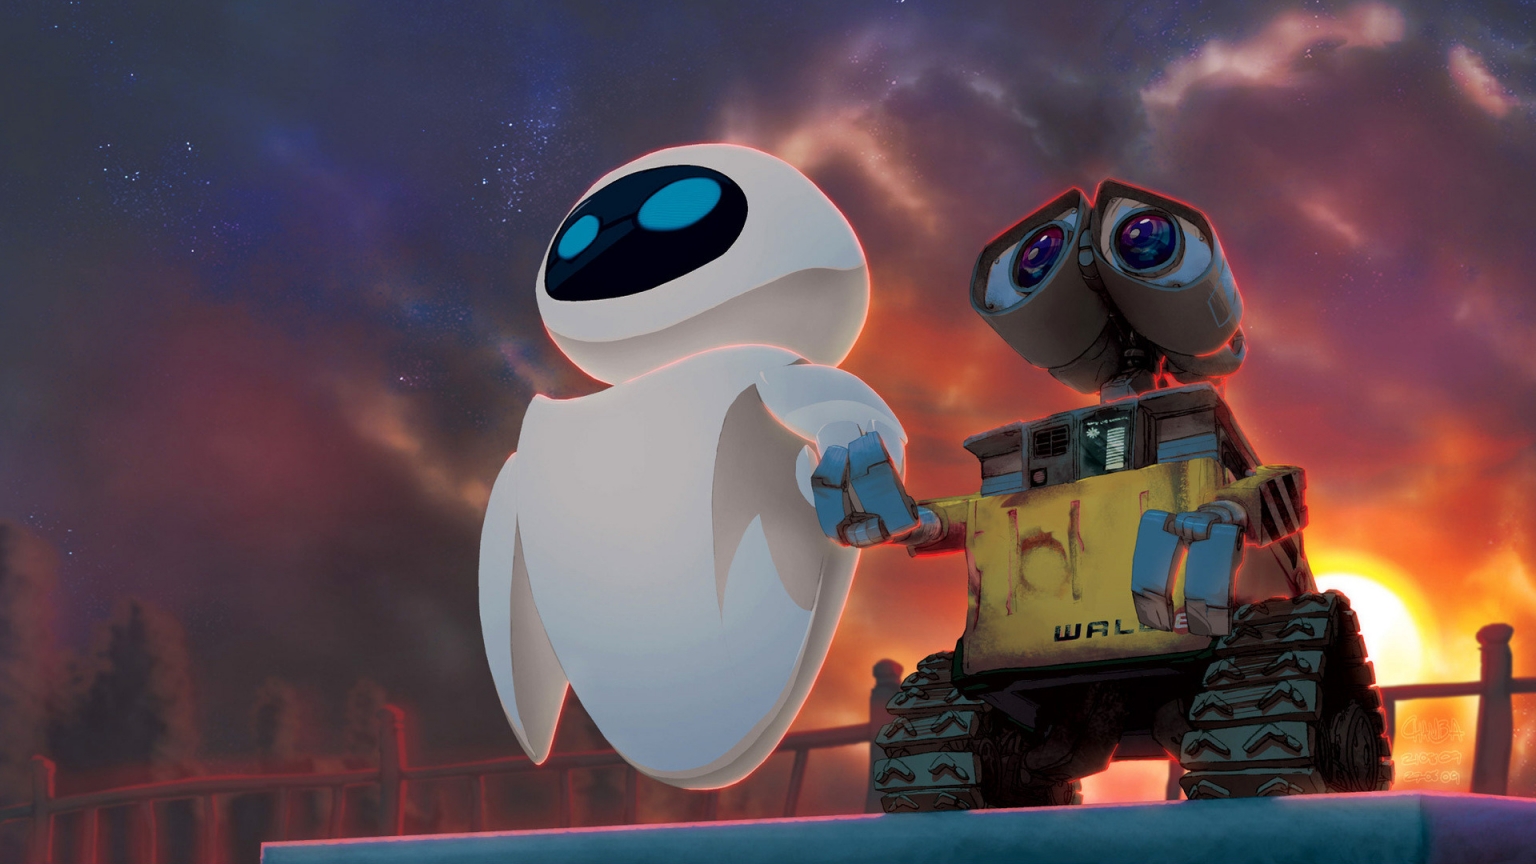 Walle Cartooned for 1536 x 864 HDTV resolution